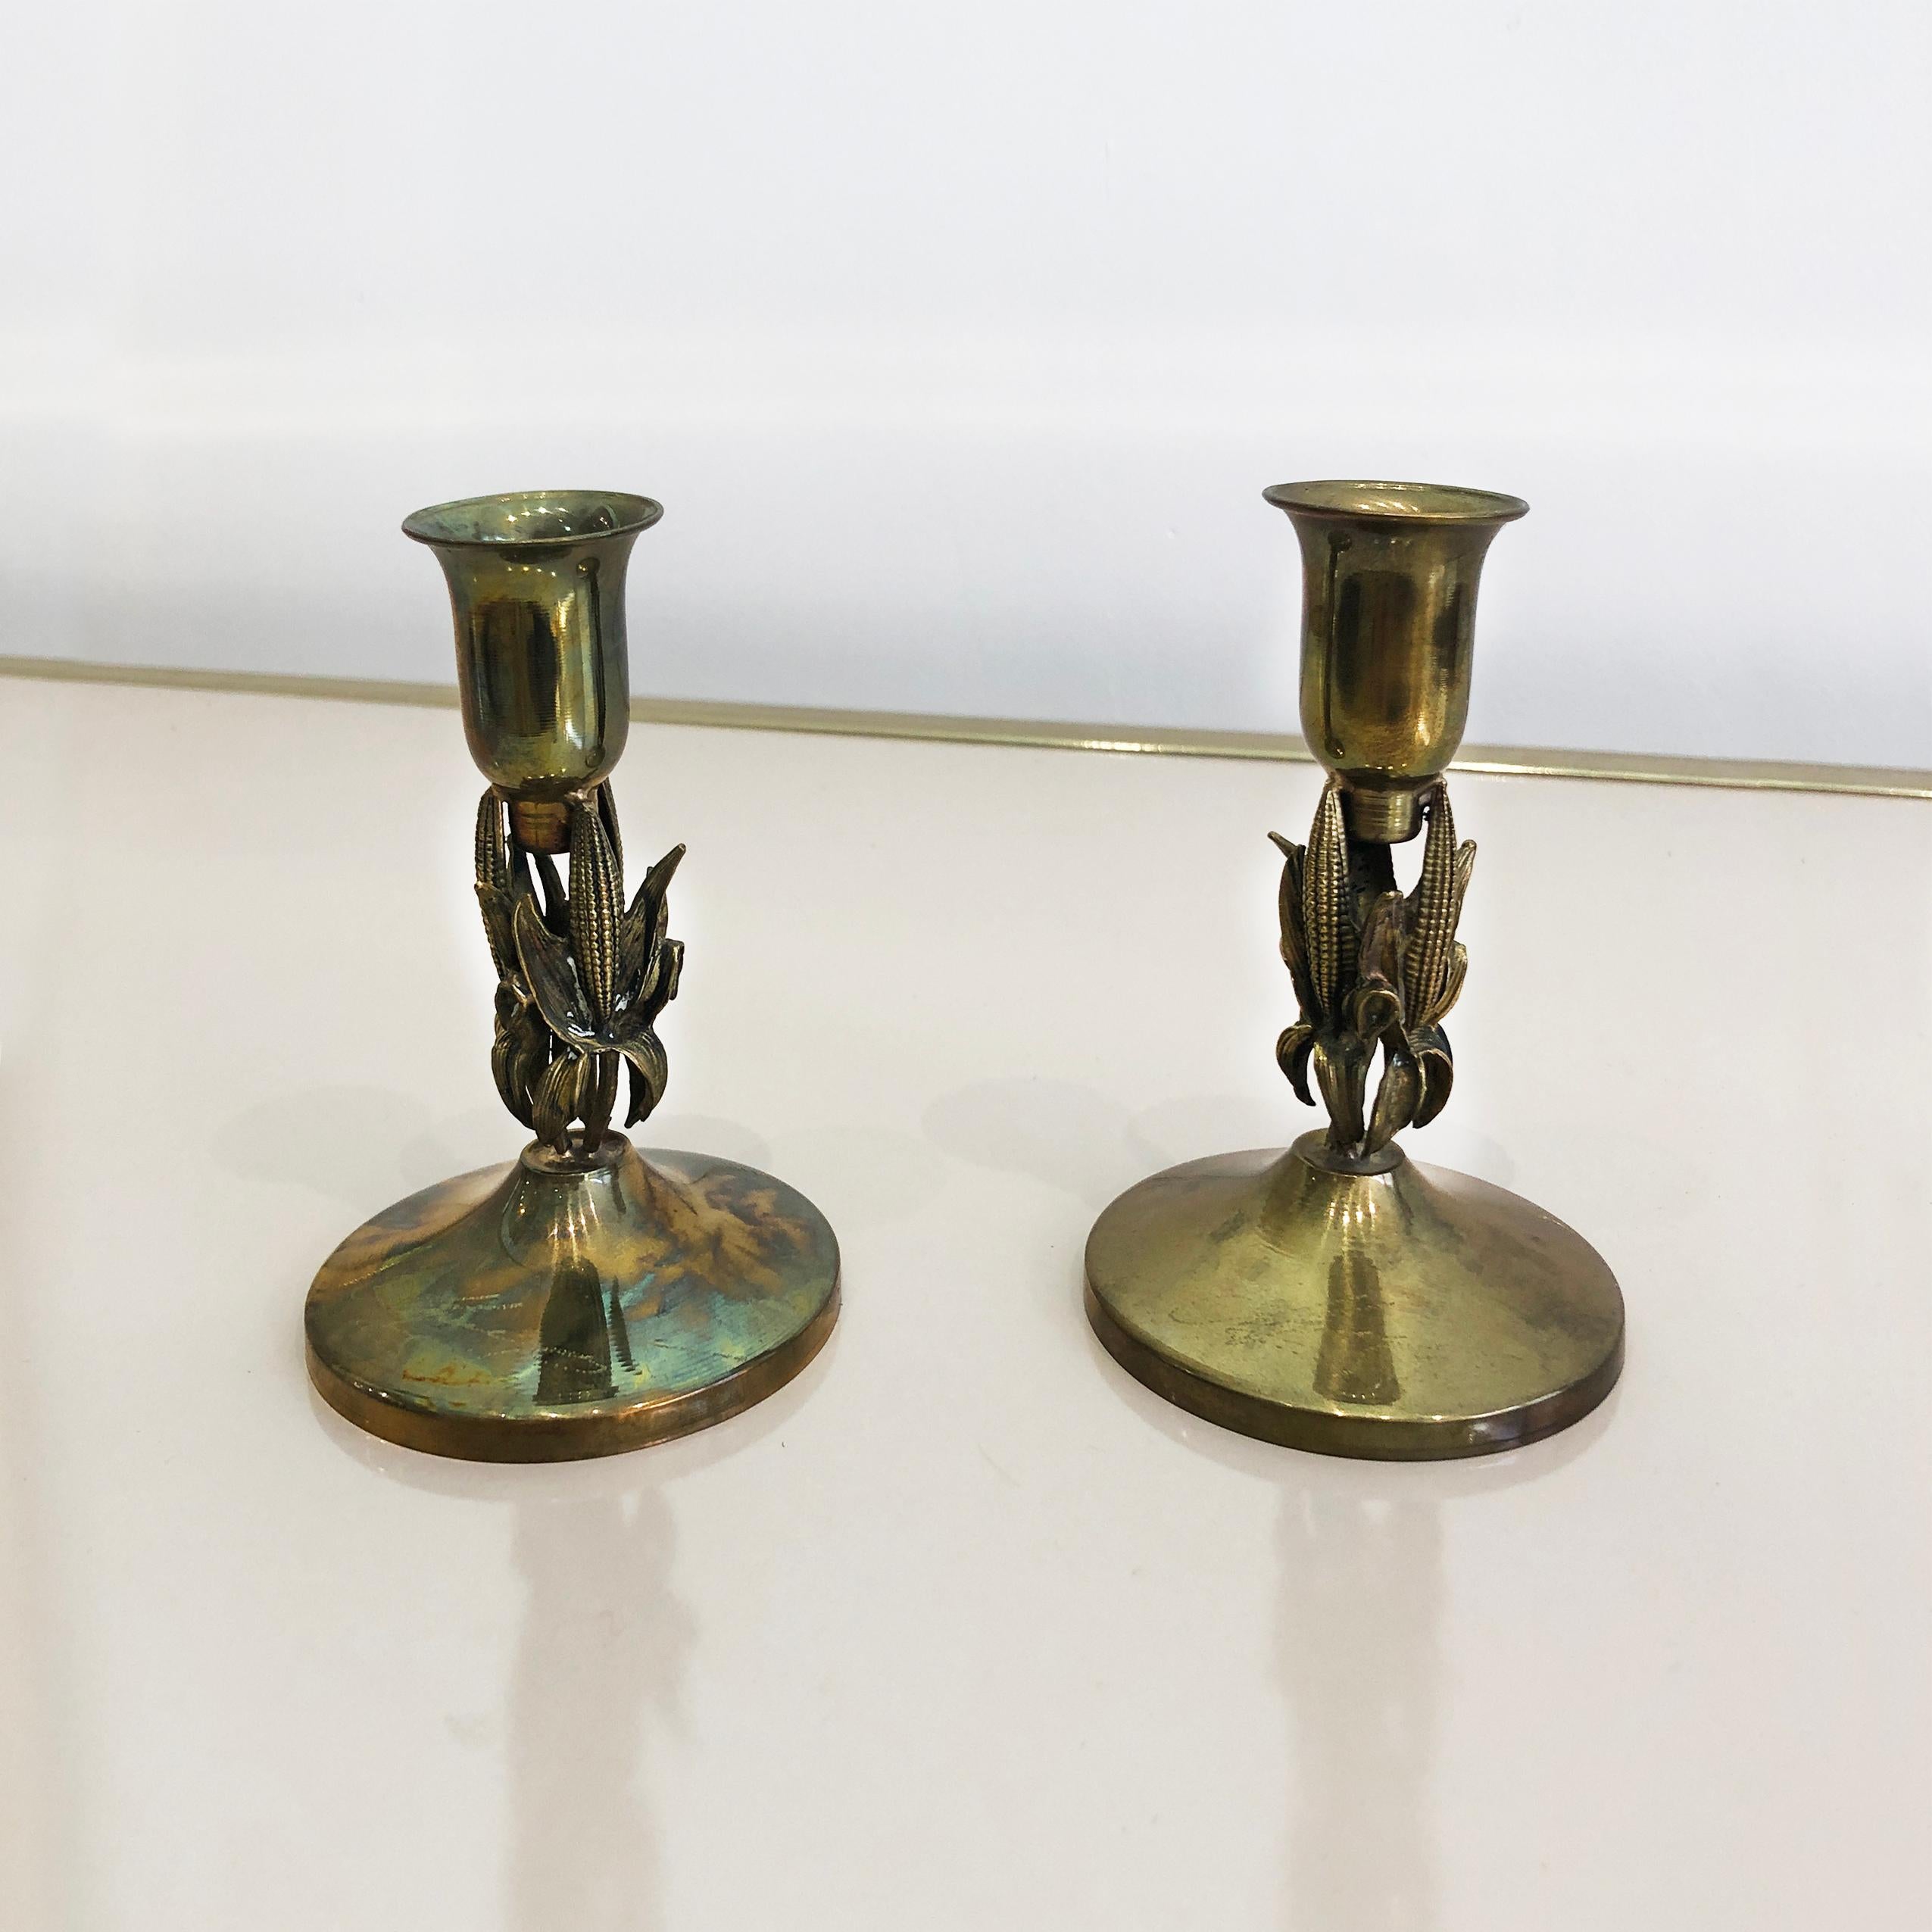 This pair of petite candlesticks, very much in the manner of Maison Charles, feature circular brass bases supporting a corn-on-the-cob midriff, finished with tulip-shaped candle holders. Indistinctly signed on the base, this pair are perfect either